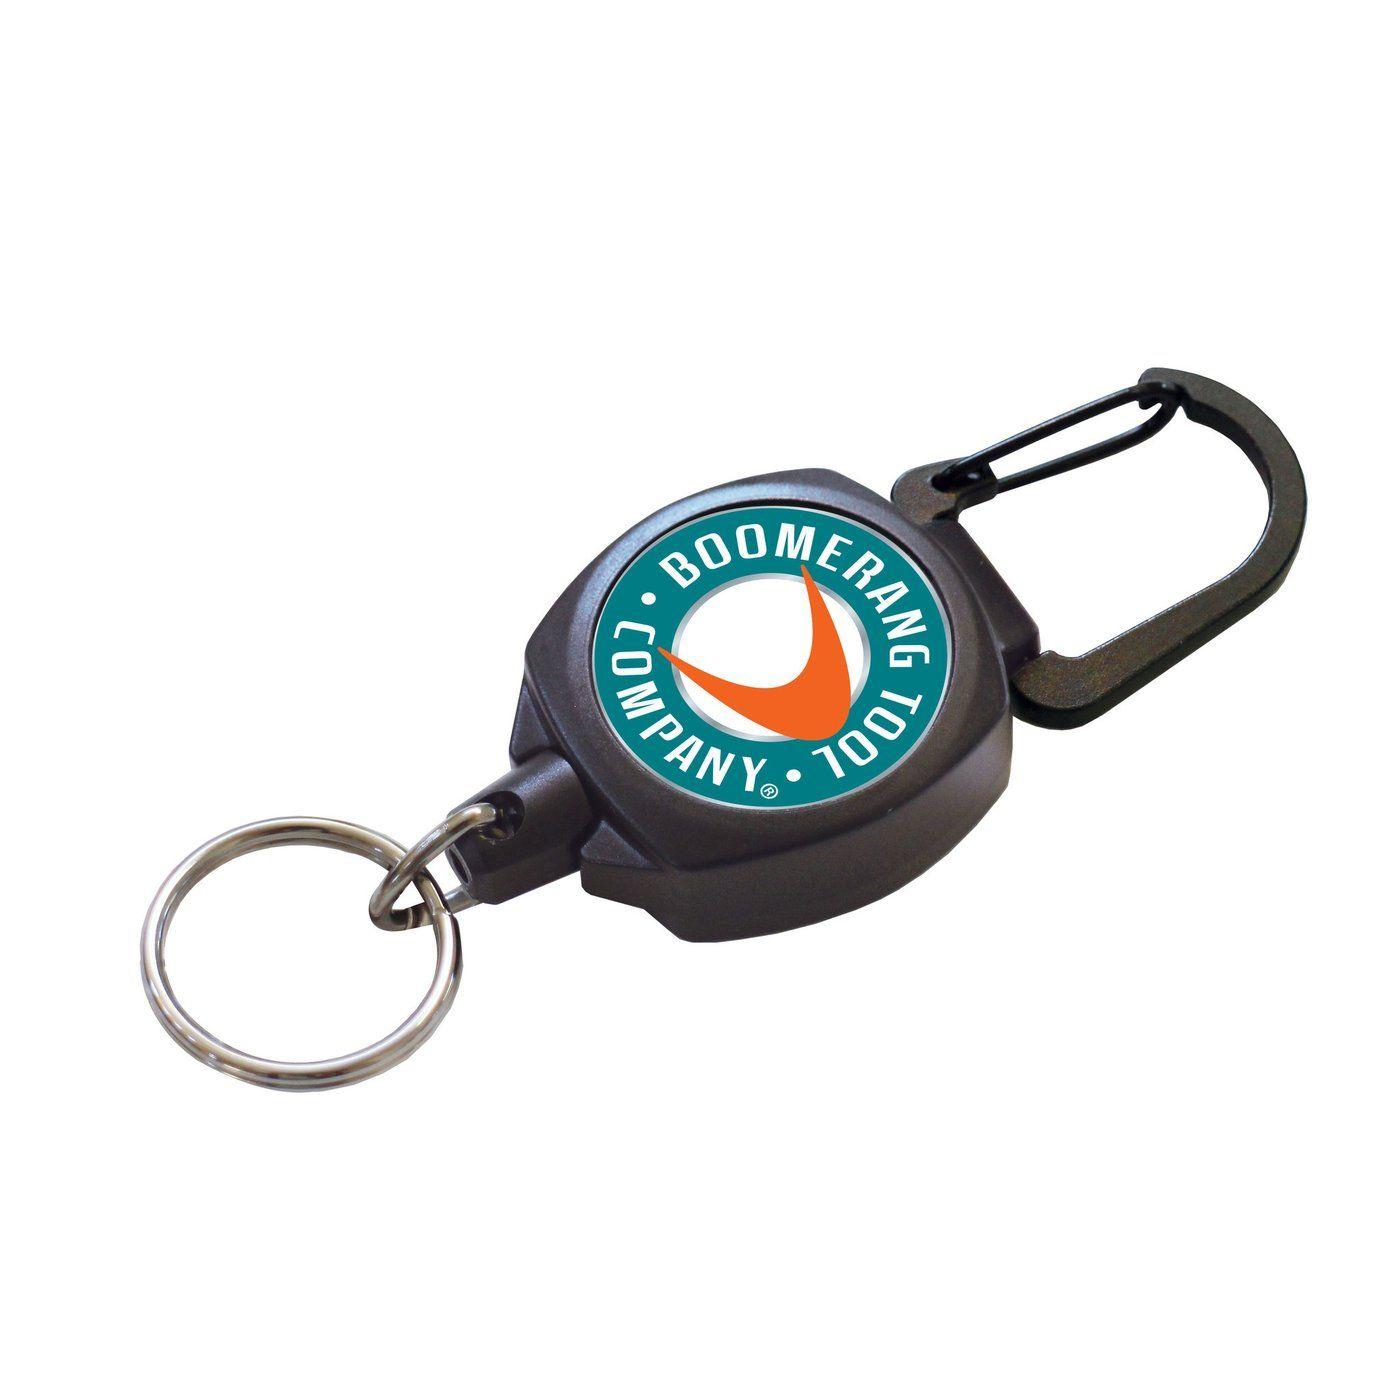 Company with Two Boomerangs Logo - Mid Size Zinger with Carabiner – Boomerang Tool Company